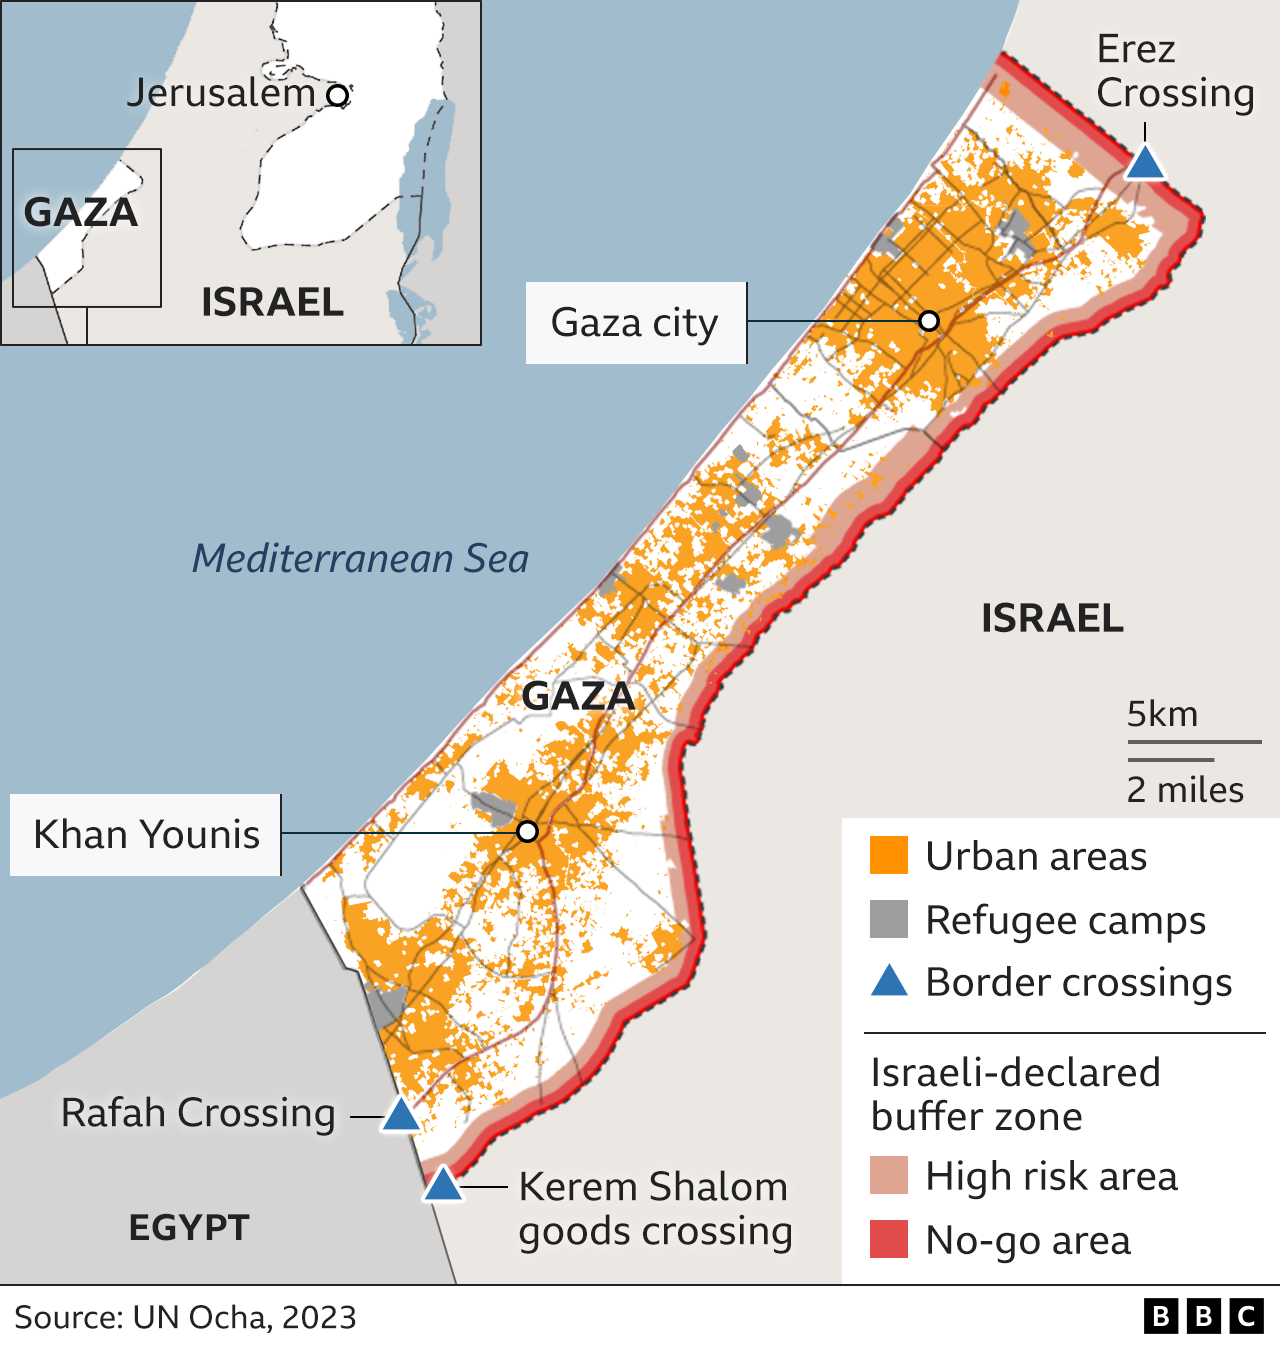 Gaza 'soon without fuel, medicine and food' - Israel authorities